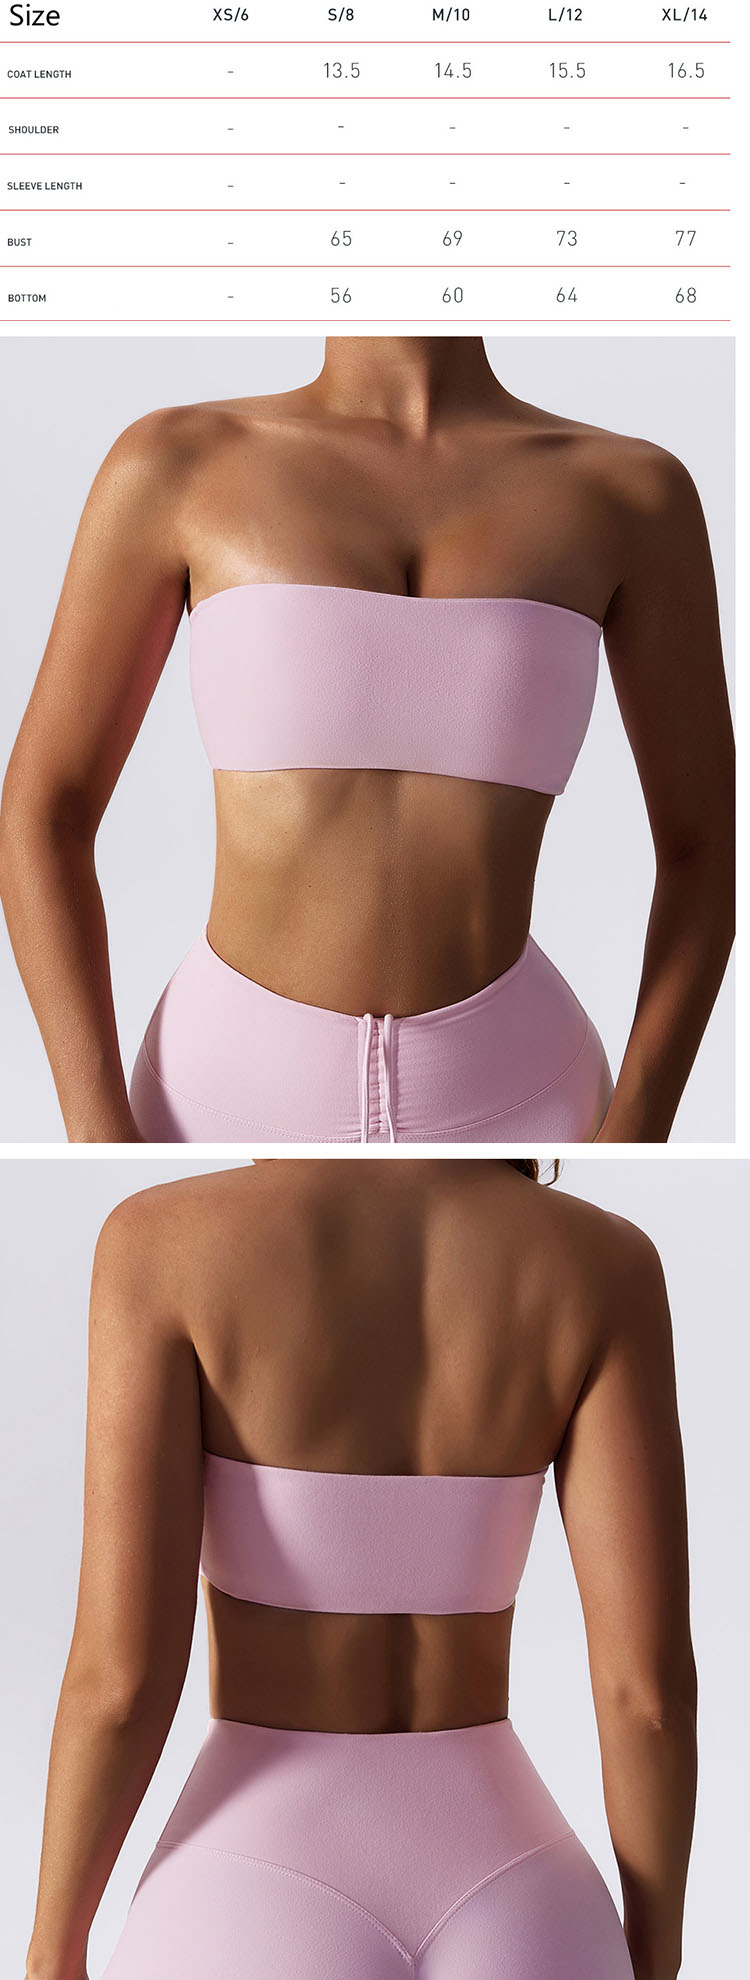 The design of sports bra for flat chest can make the upper body more slender